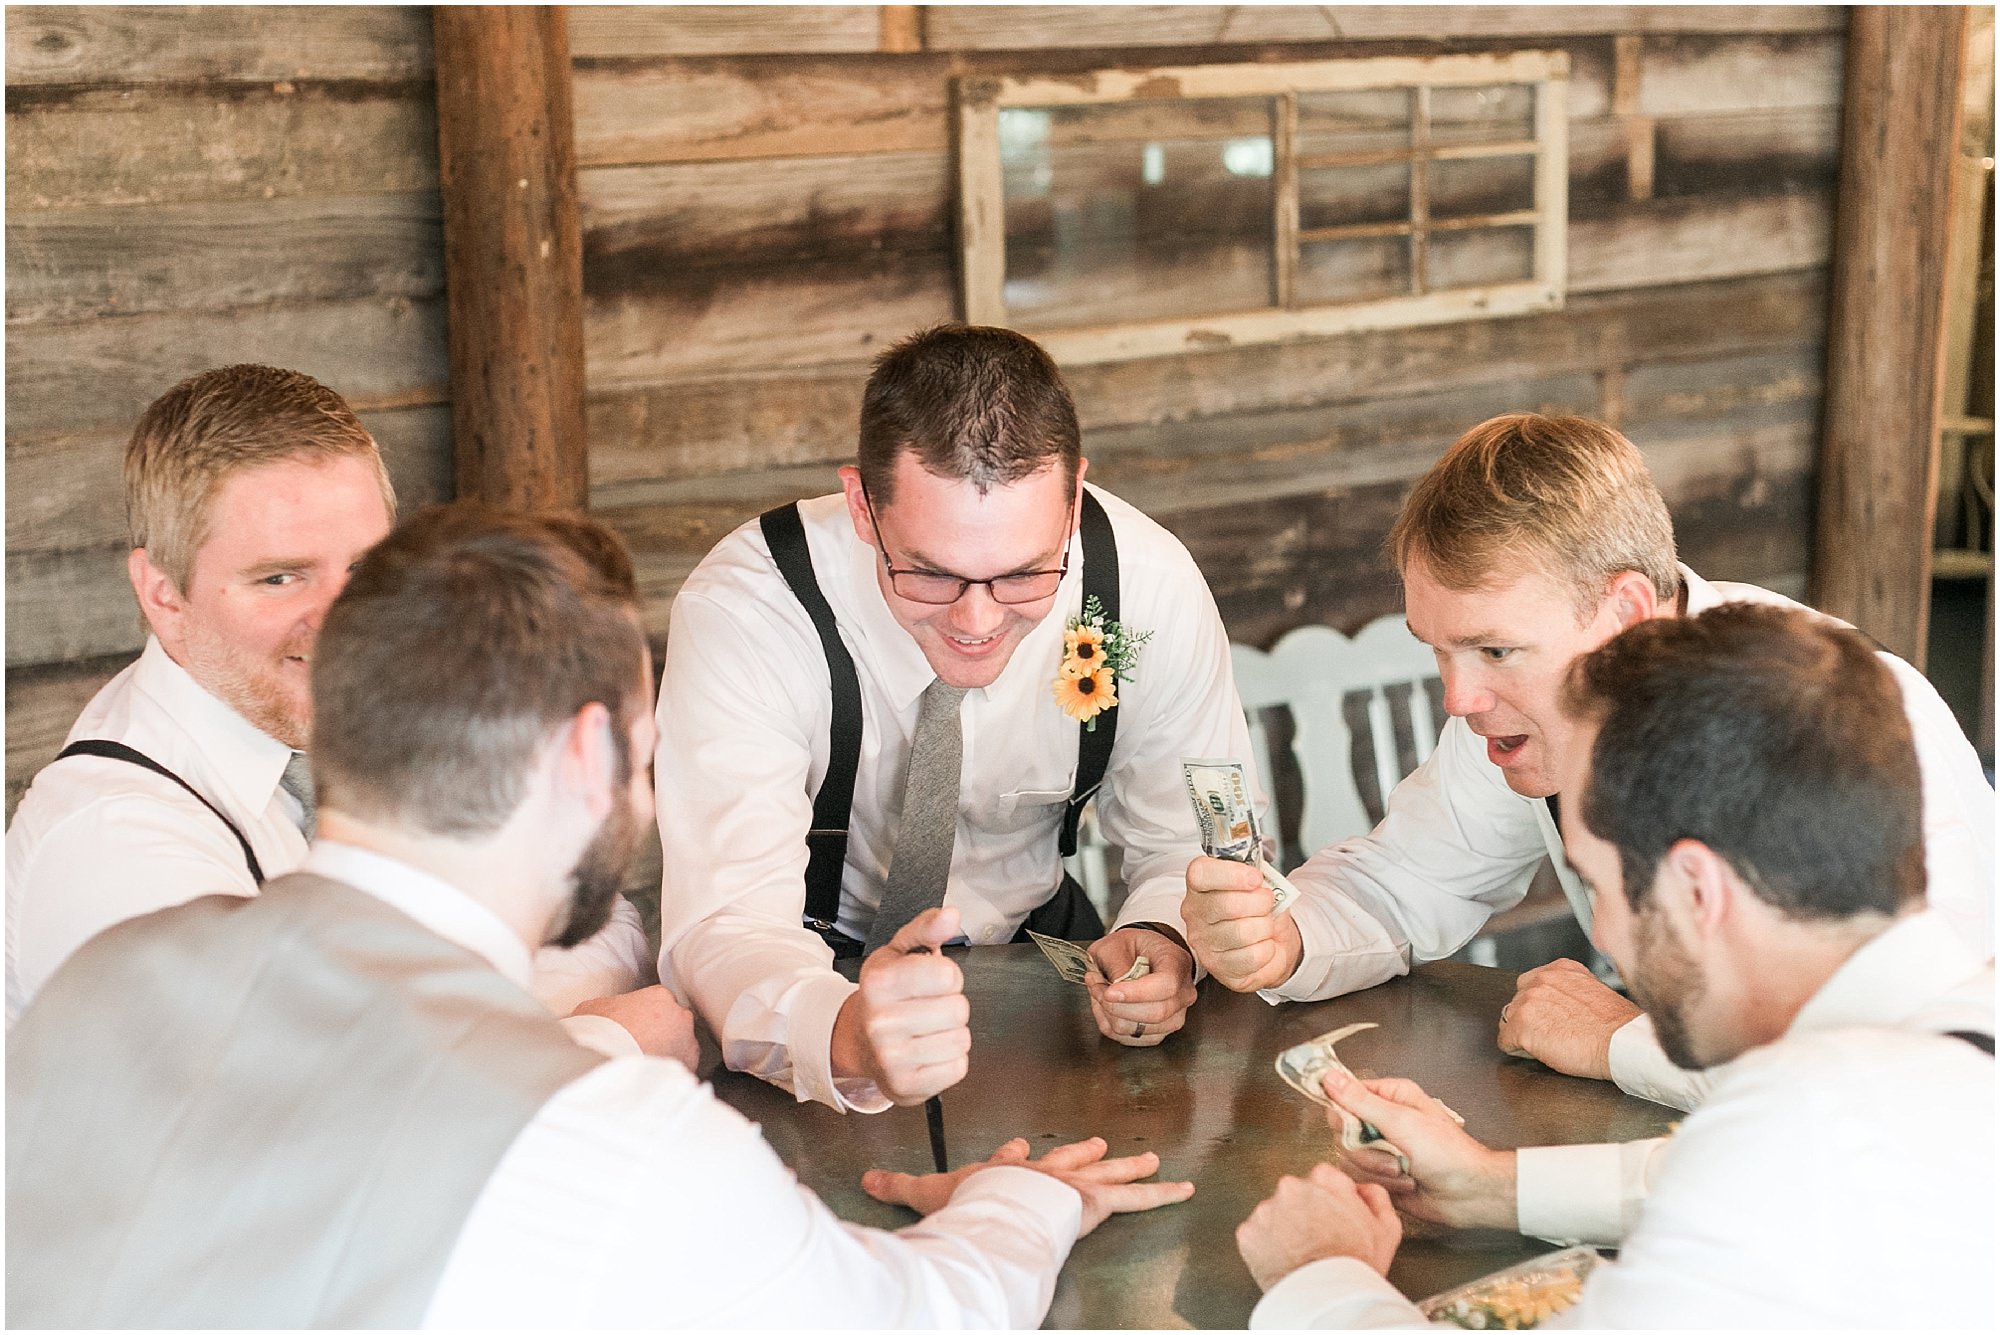 Groom and his groomsmen playing games while waiting for the wedding to begin